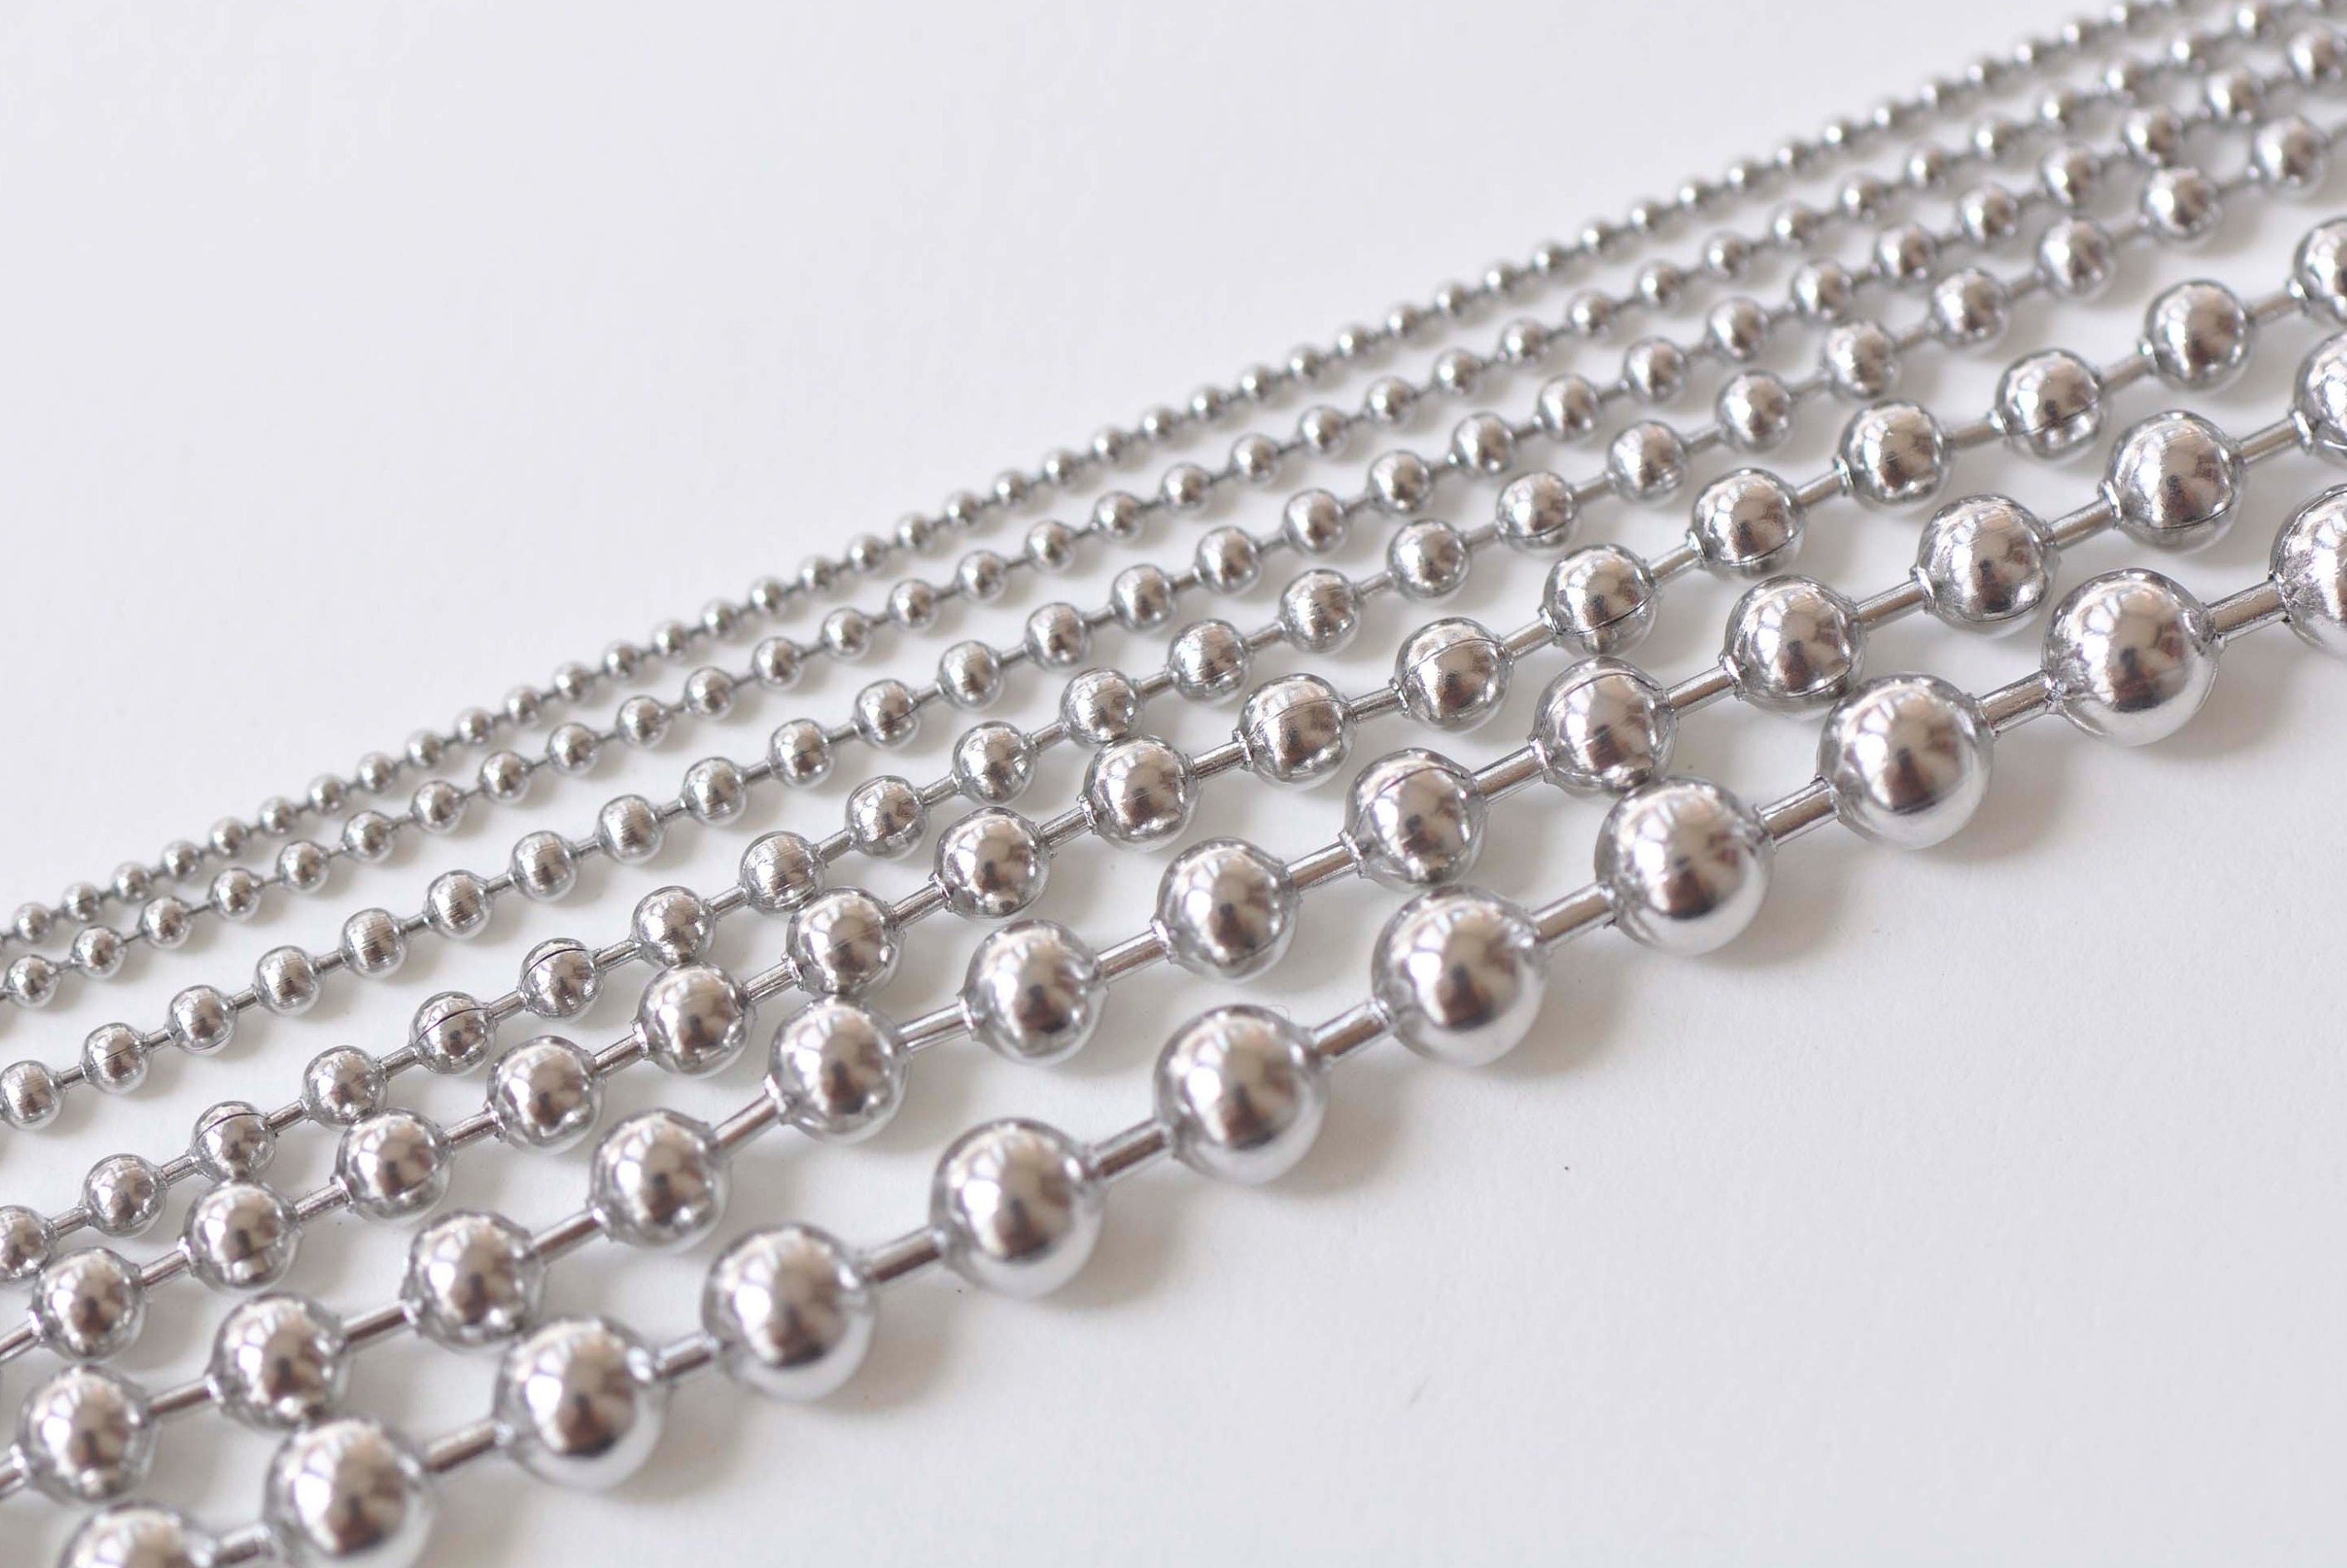 5m Dia 1.5mm 2mm 2.4mm 3.2mm Beaded Ball Chain Bulk Stainless Steel Jewelry  Chains for Necklaces DIY Jewelry Making Supplies